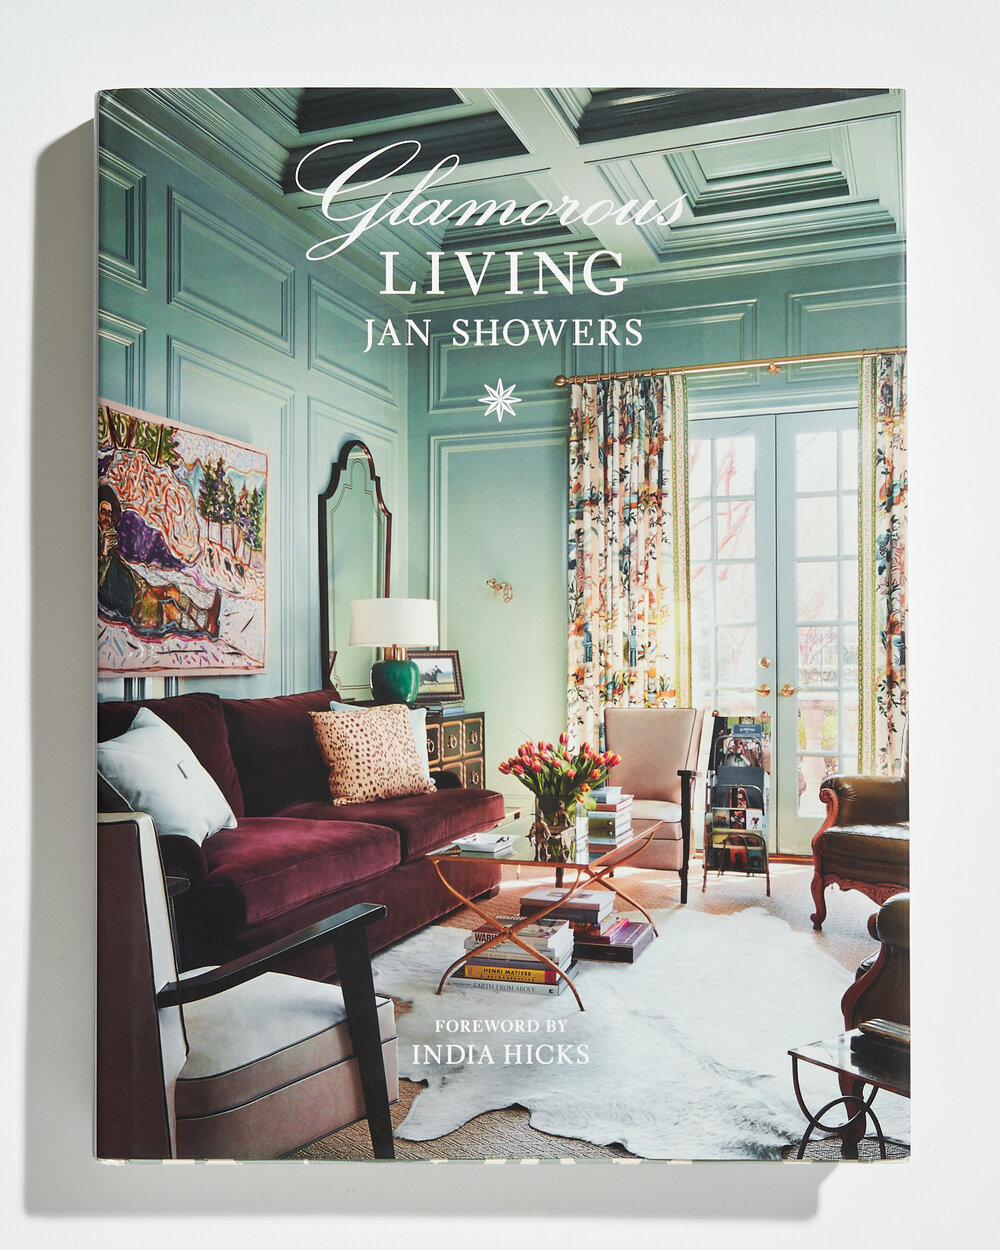 Cover Of Jan Showers book Glamorous Living